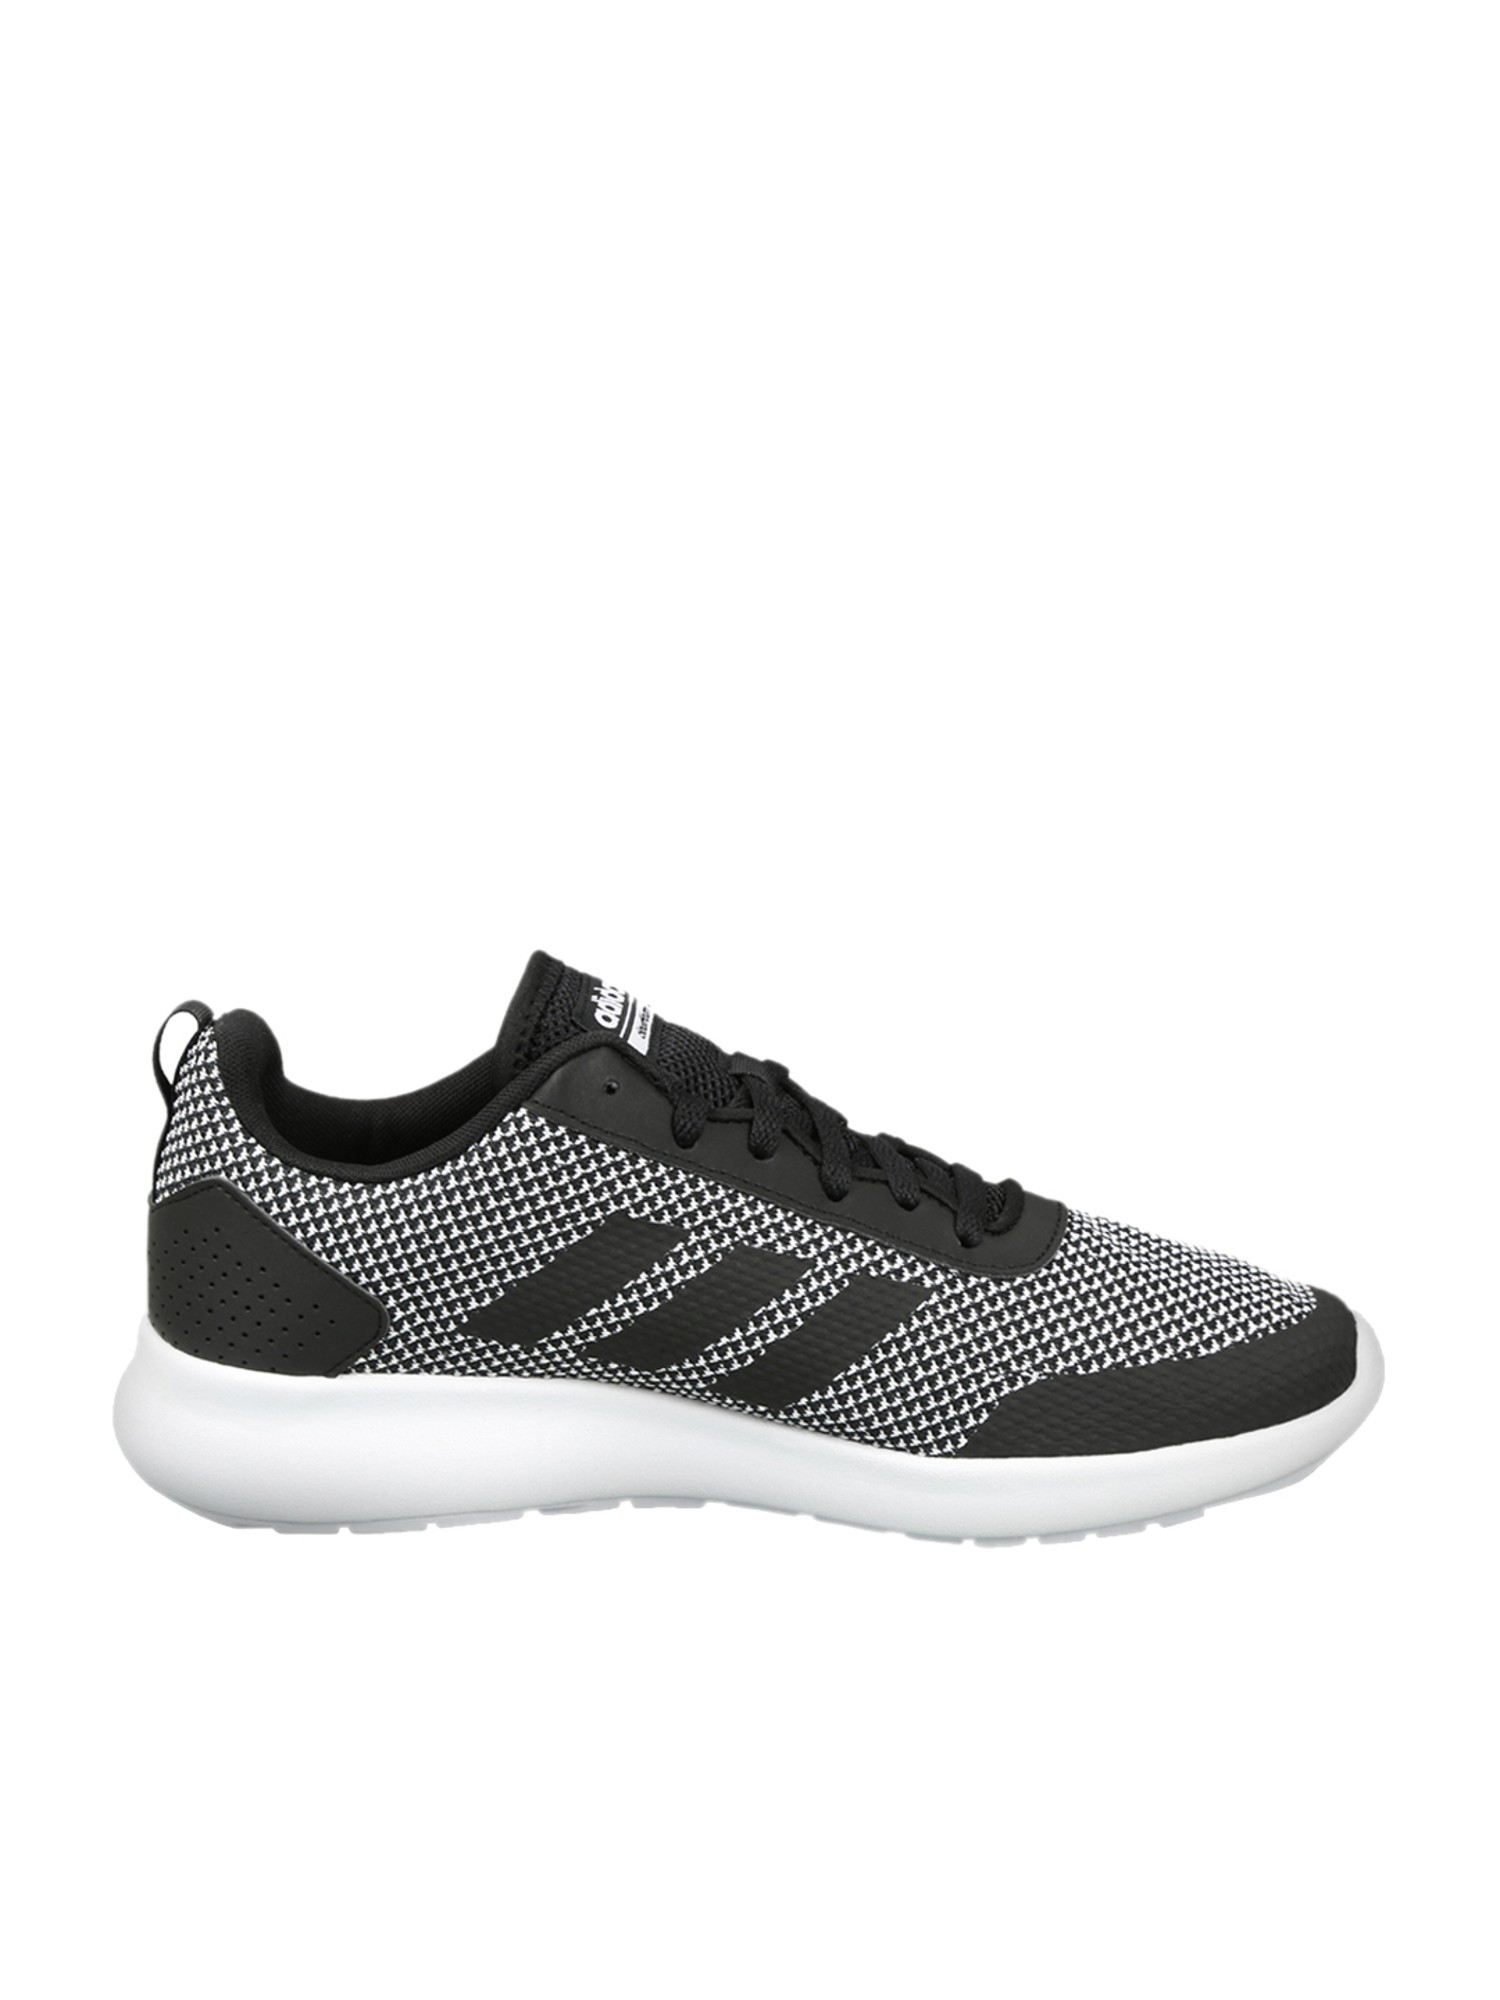 adidas men's argecy running shoes